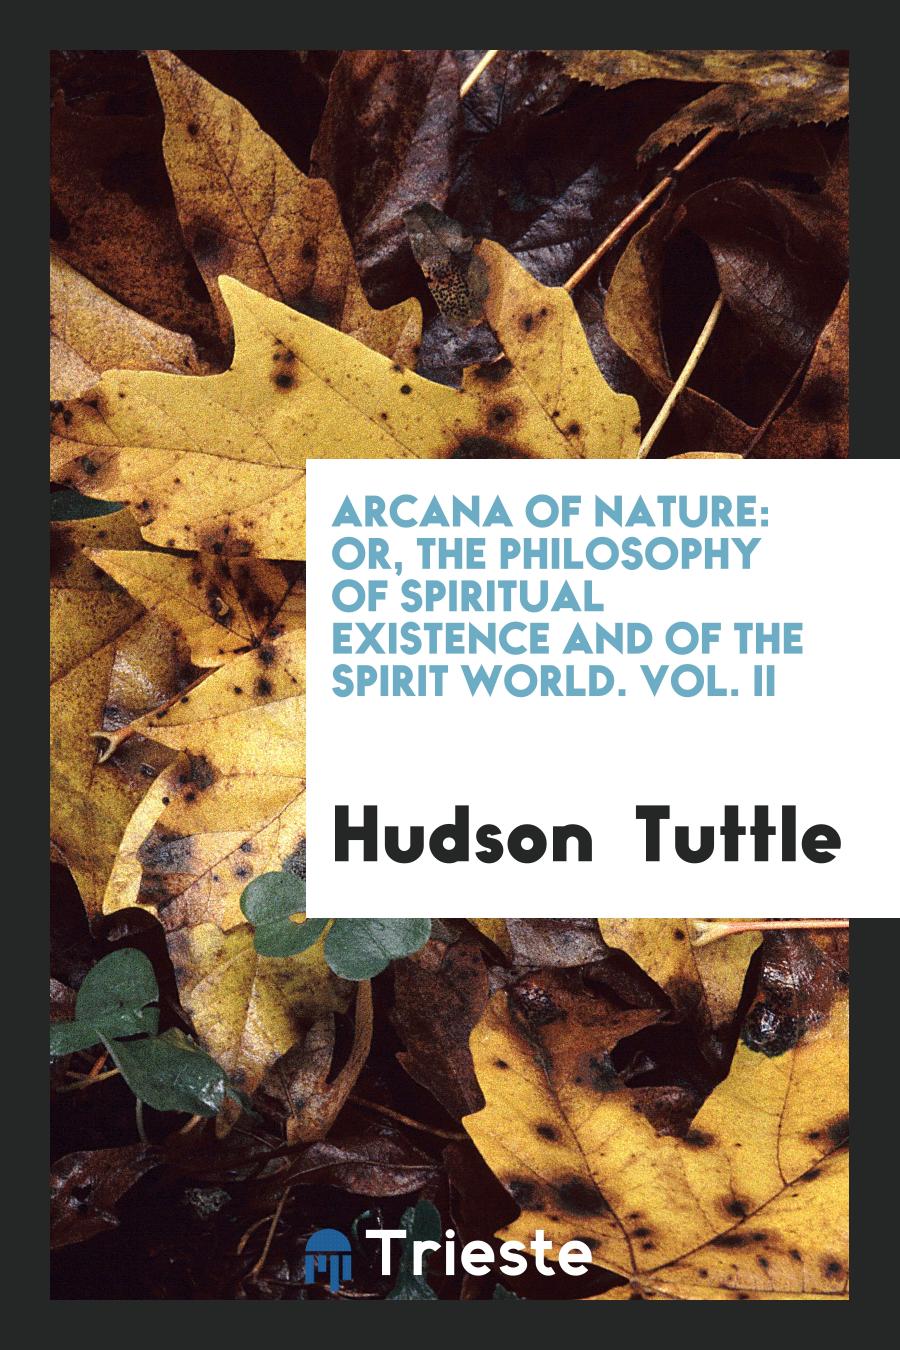 Arcana of Nature: Or, The Philosophy of Spiritual Existence and of the Spirit World. Vol. II